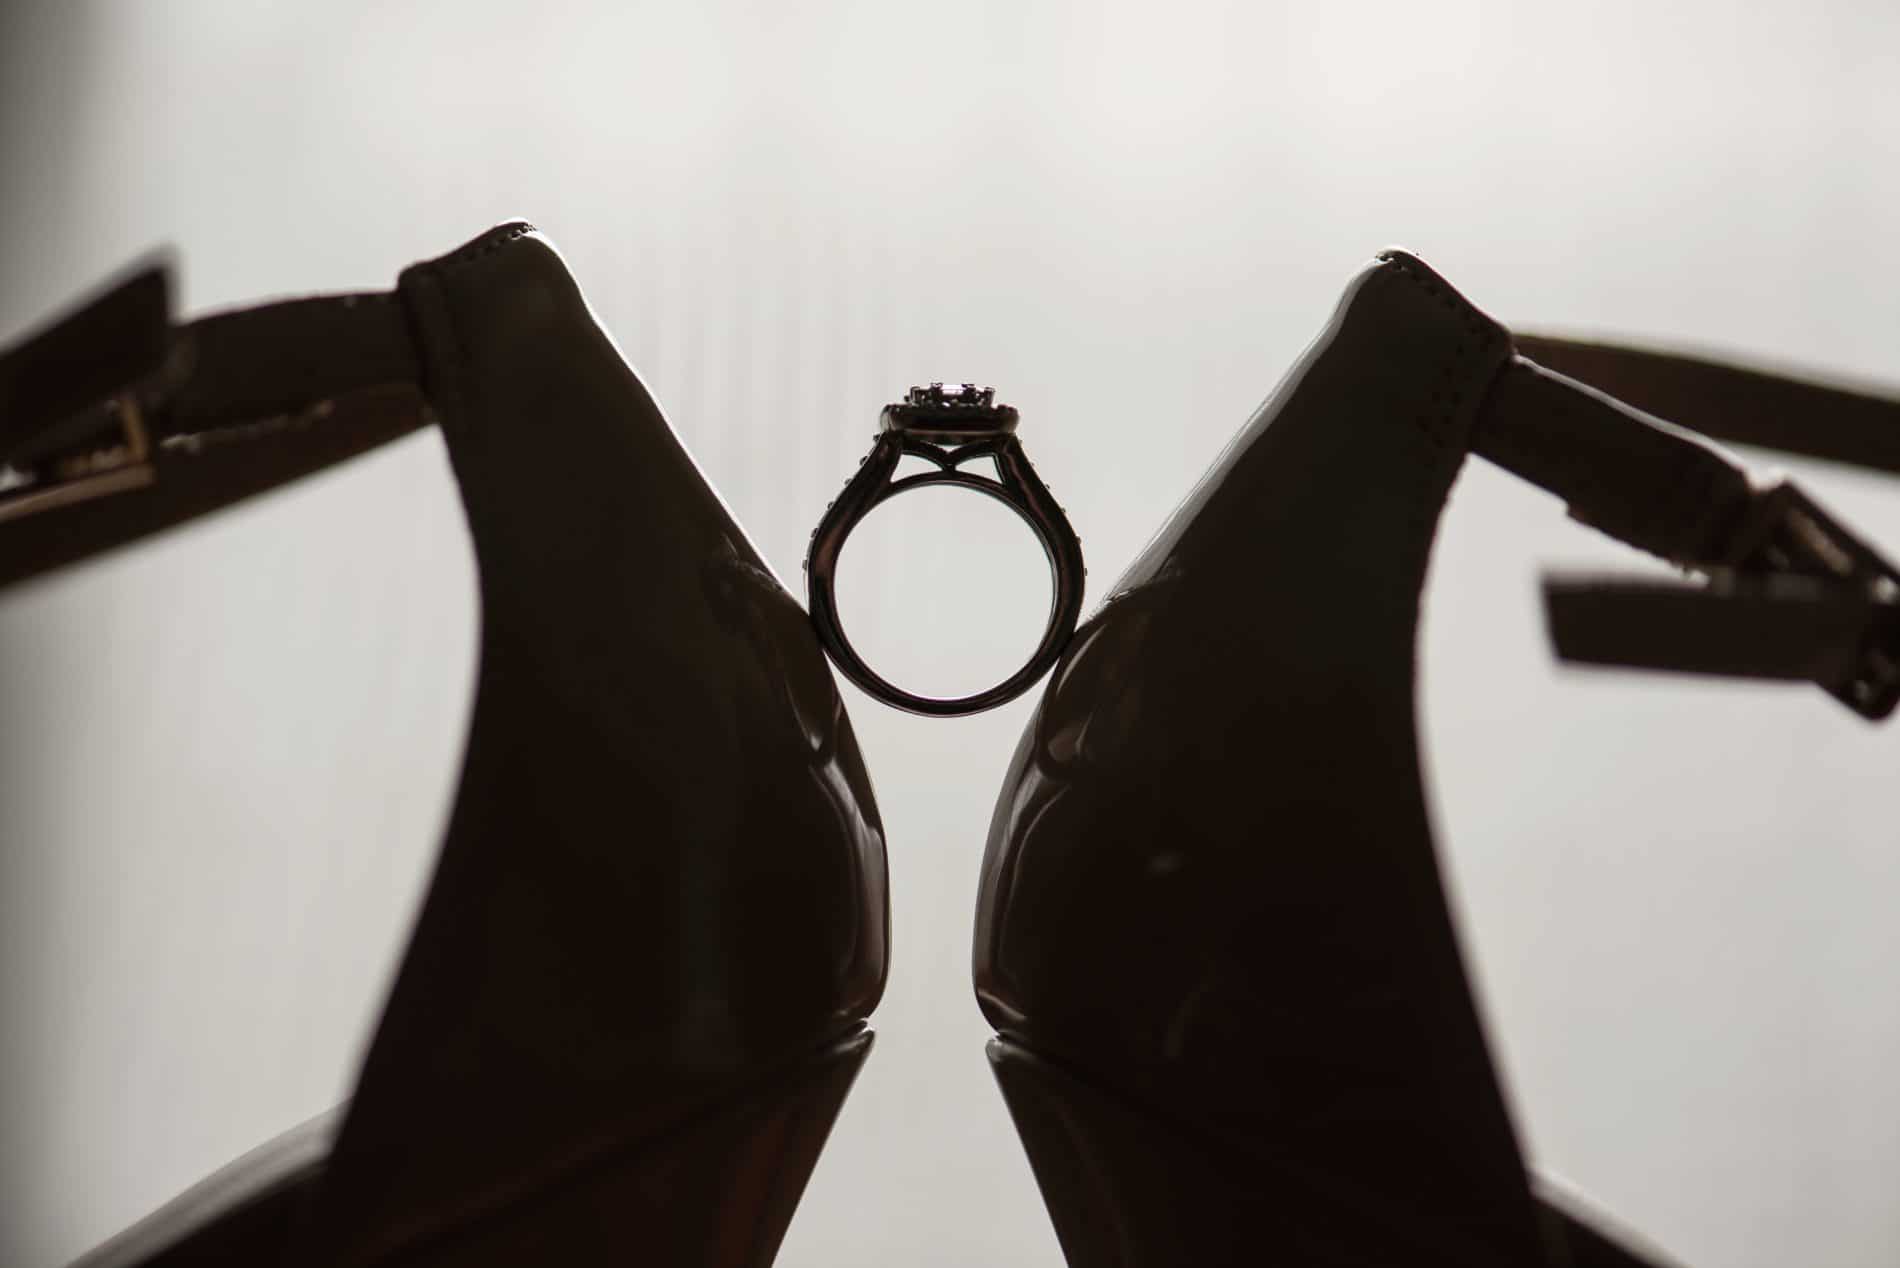 Amazing photograph of a Wedding Ring